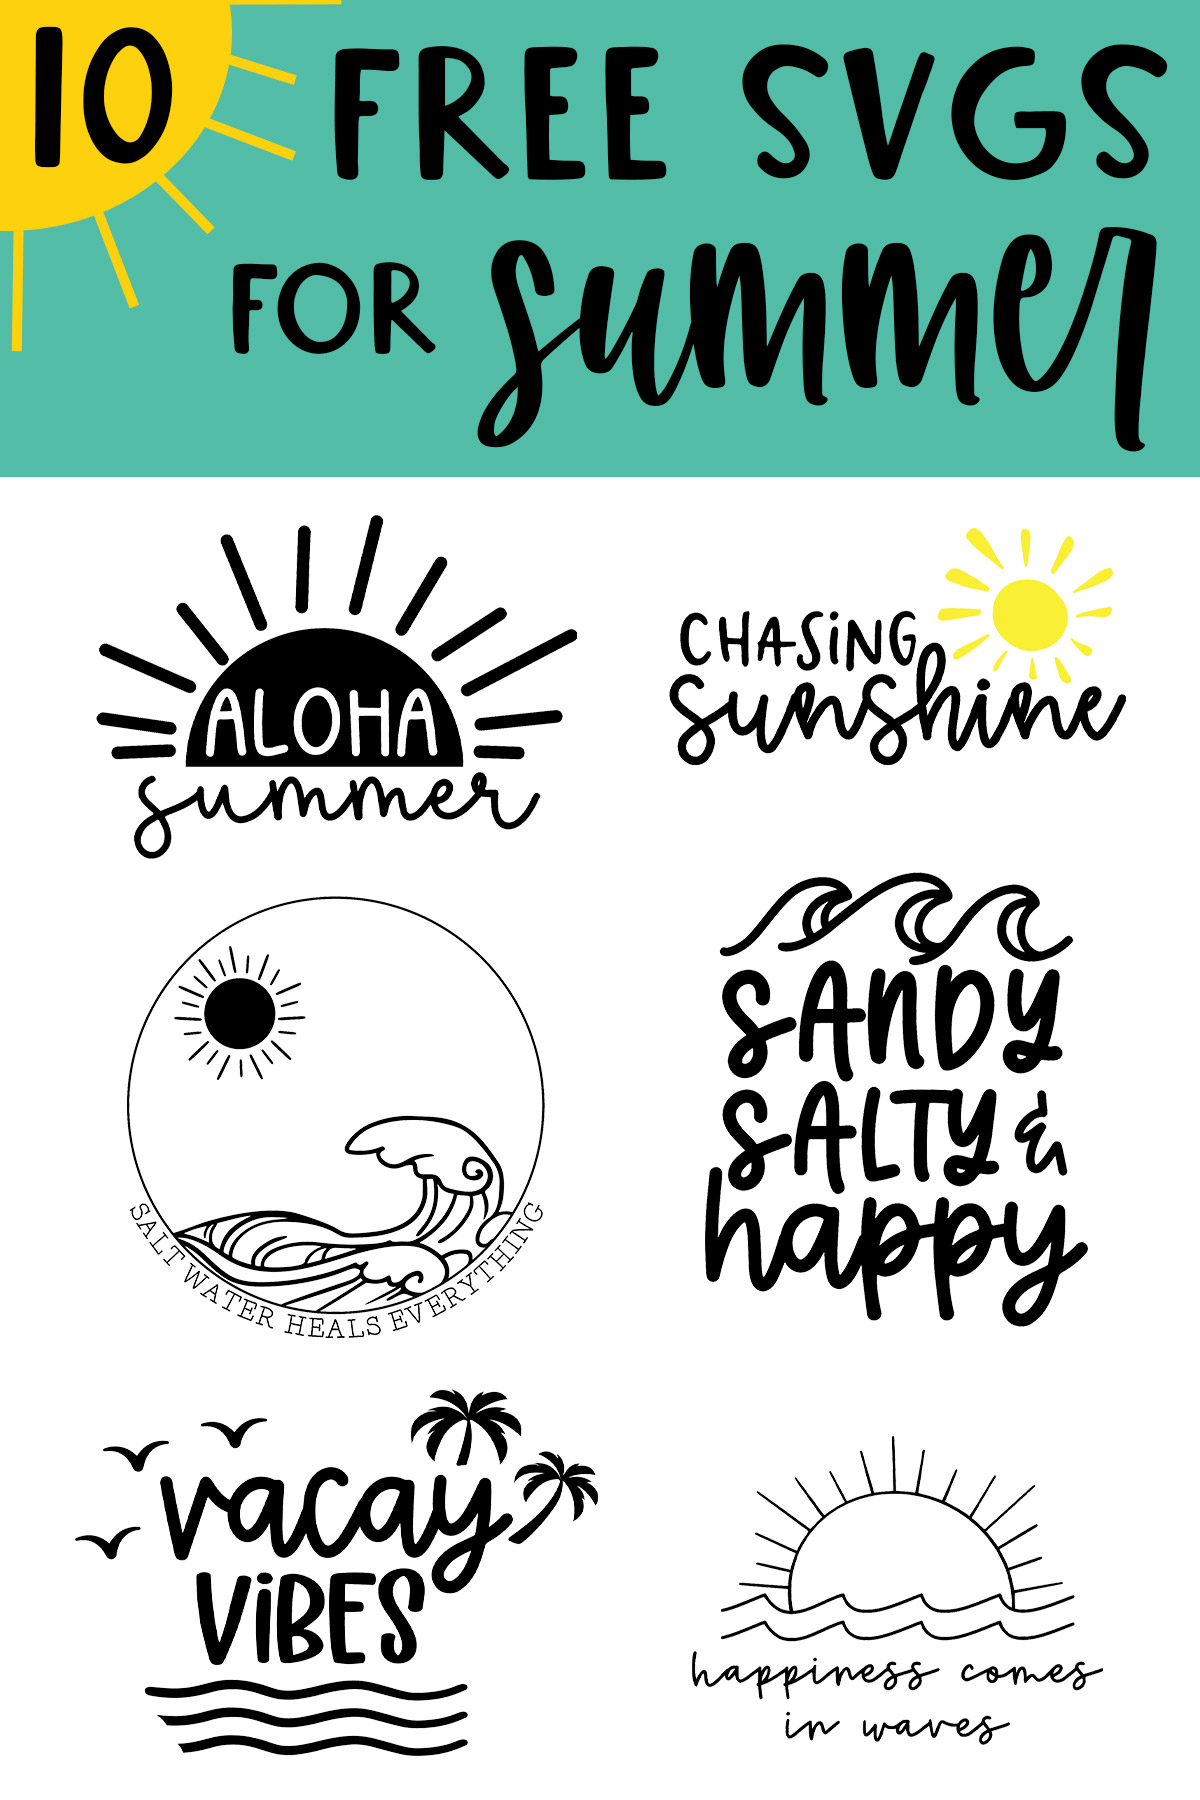 At the top it says 10 free SVGs for summer. Below that are some of the free SVGs you can get in the set.